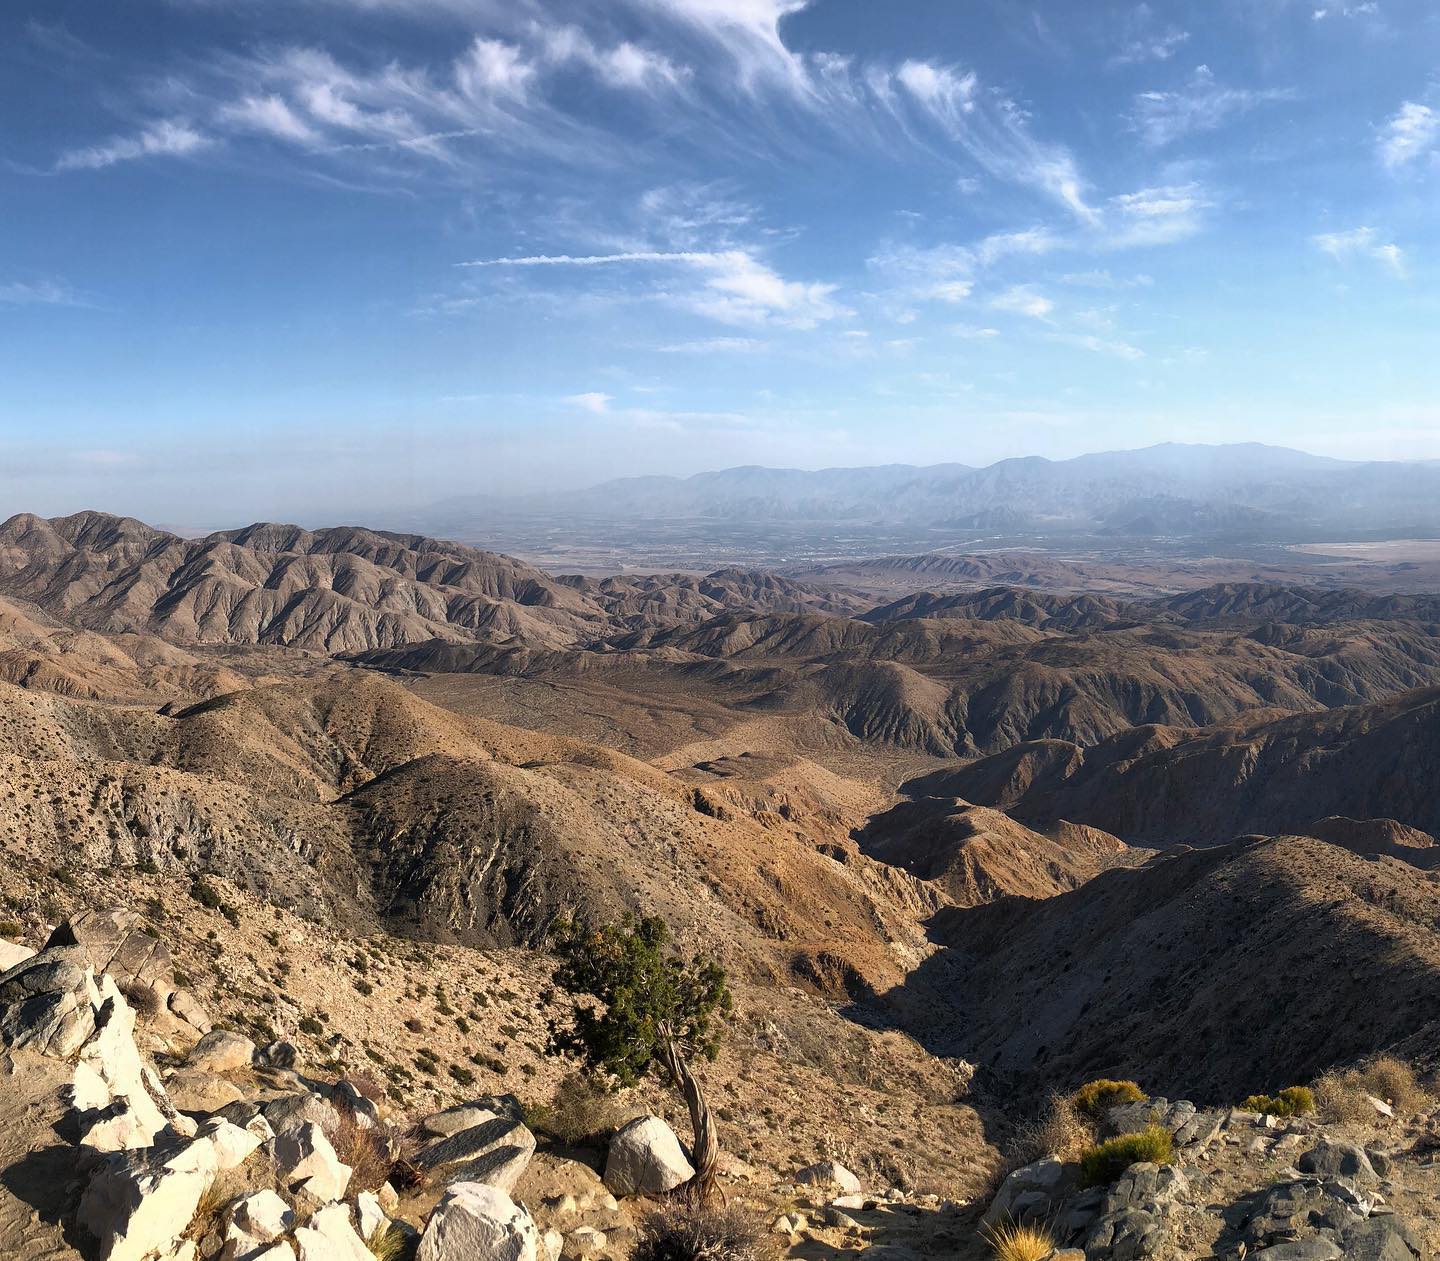 Keys View, Joshua Tree NP, California

@ccountryatheart #usasehnsuchtstage 

Currently, we would even be happy if we could travel to the USA at all. We almost wouldn't care about the place. If we had the choice, then of course Palm Springs. Hiking the Indian Canyons, relaxing by the pool, great people, amazing food and drinks. Within easy reach of LA and San Diego and Joshua Tree NP on our doorstep. Should we be fed up of the heat (which I can't imagine), then there are still the San Bernadino Mountains.

#usa #us #unitedstates #unitedstatesofamerica #america #usatravel #usatravels #usatrip #californiatrip #california #californialove #californiadreaming #joshuatreenps #joshuatree #keysview #desertlandscape #desertlove #amazingview #amazingdestination #onlyincalifornia #travellover #travelgrams #explorecalifornia #picoftheday #travelblogger #realusa #usaadventures #travelcapture #passionpassport